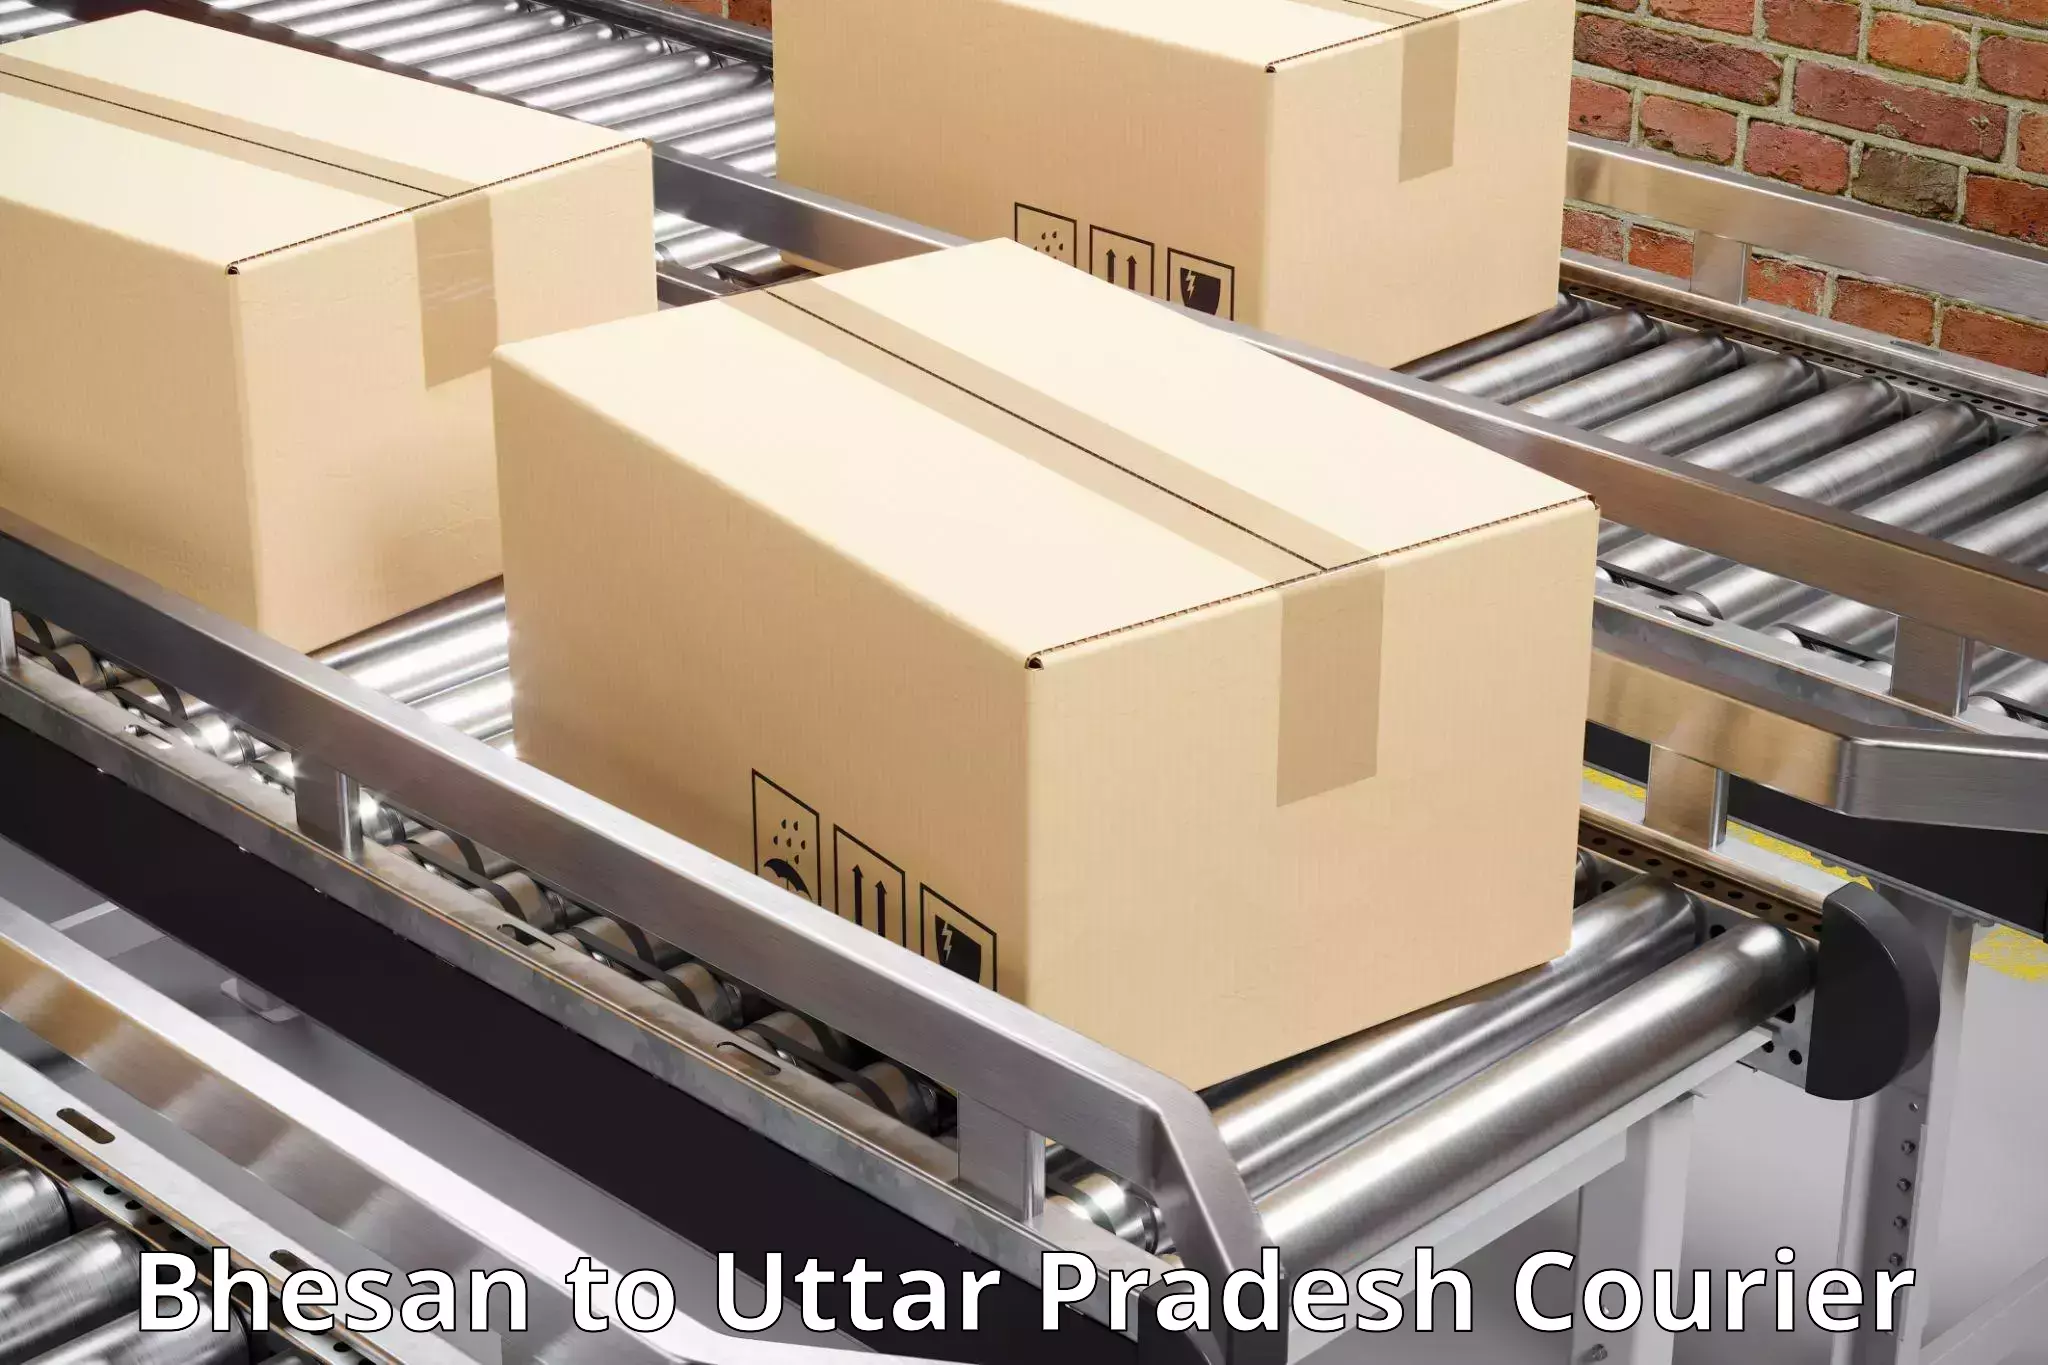 Easy access courier services Bhesan to Vrindavan